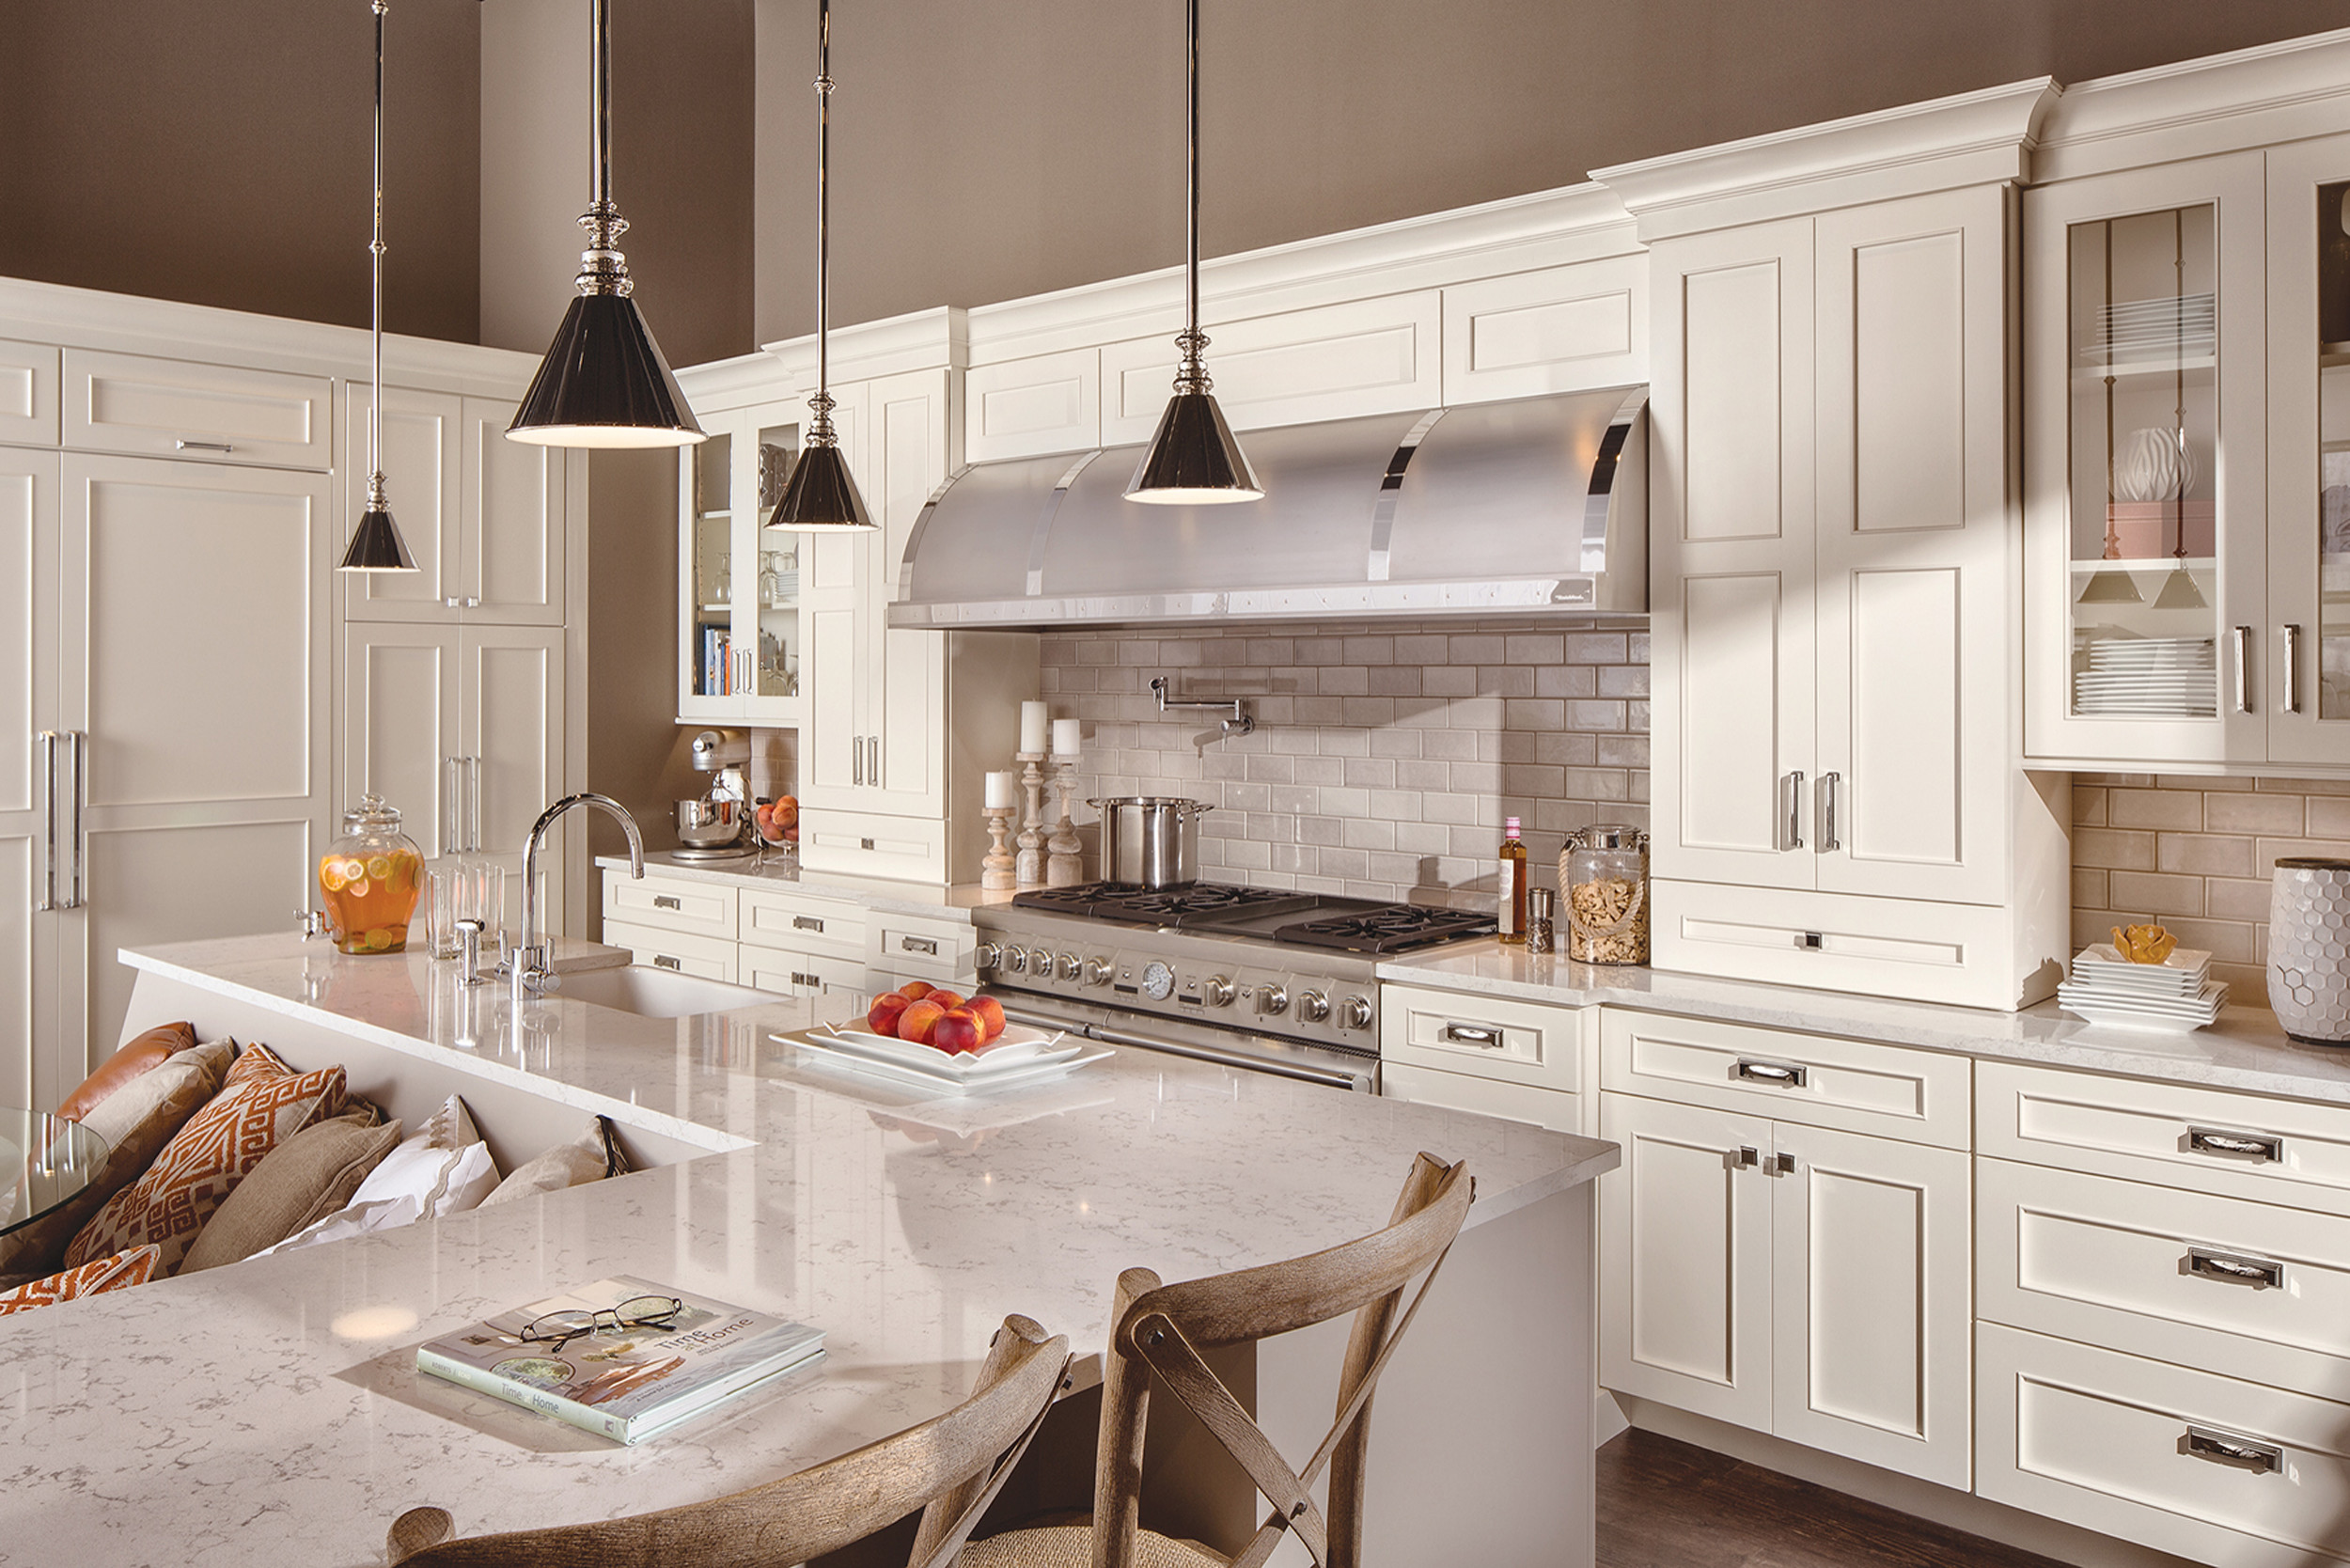 https://st.hzcdn.com/simgs/pictures/kitchens/transitional-white-on-white-kitchen-remodel-from-dura-supreme-cabinetry-dura-supreme-cabinetry-img~a1e1fe9a0790d66c_14-7807-1-26aea7d.jpg